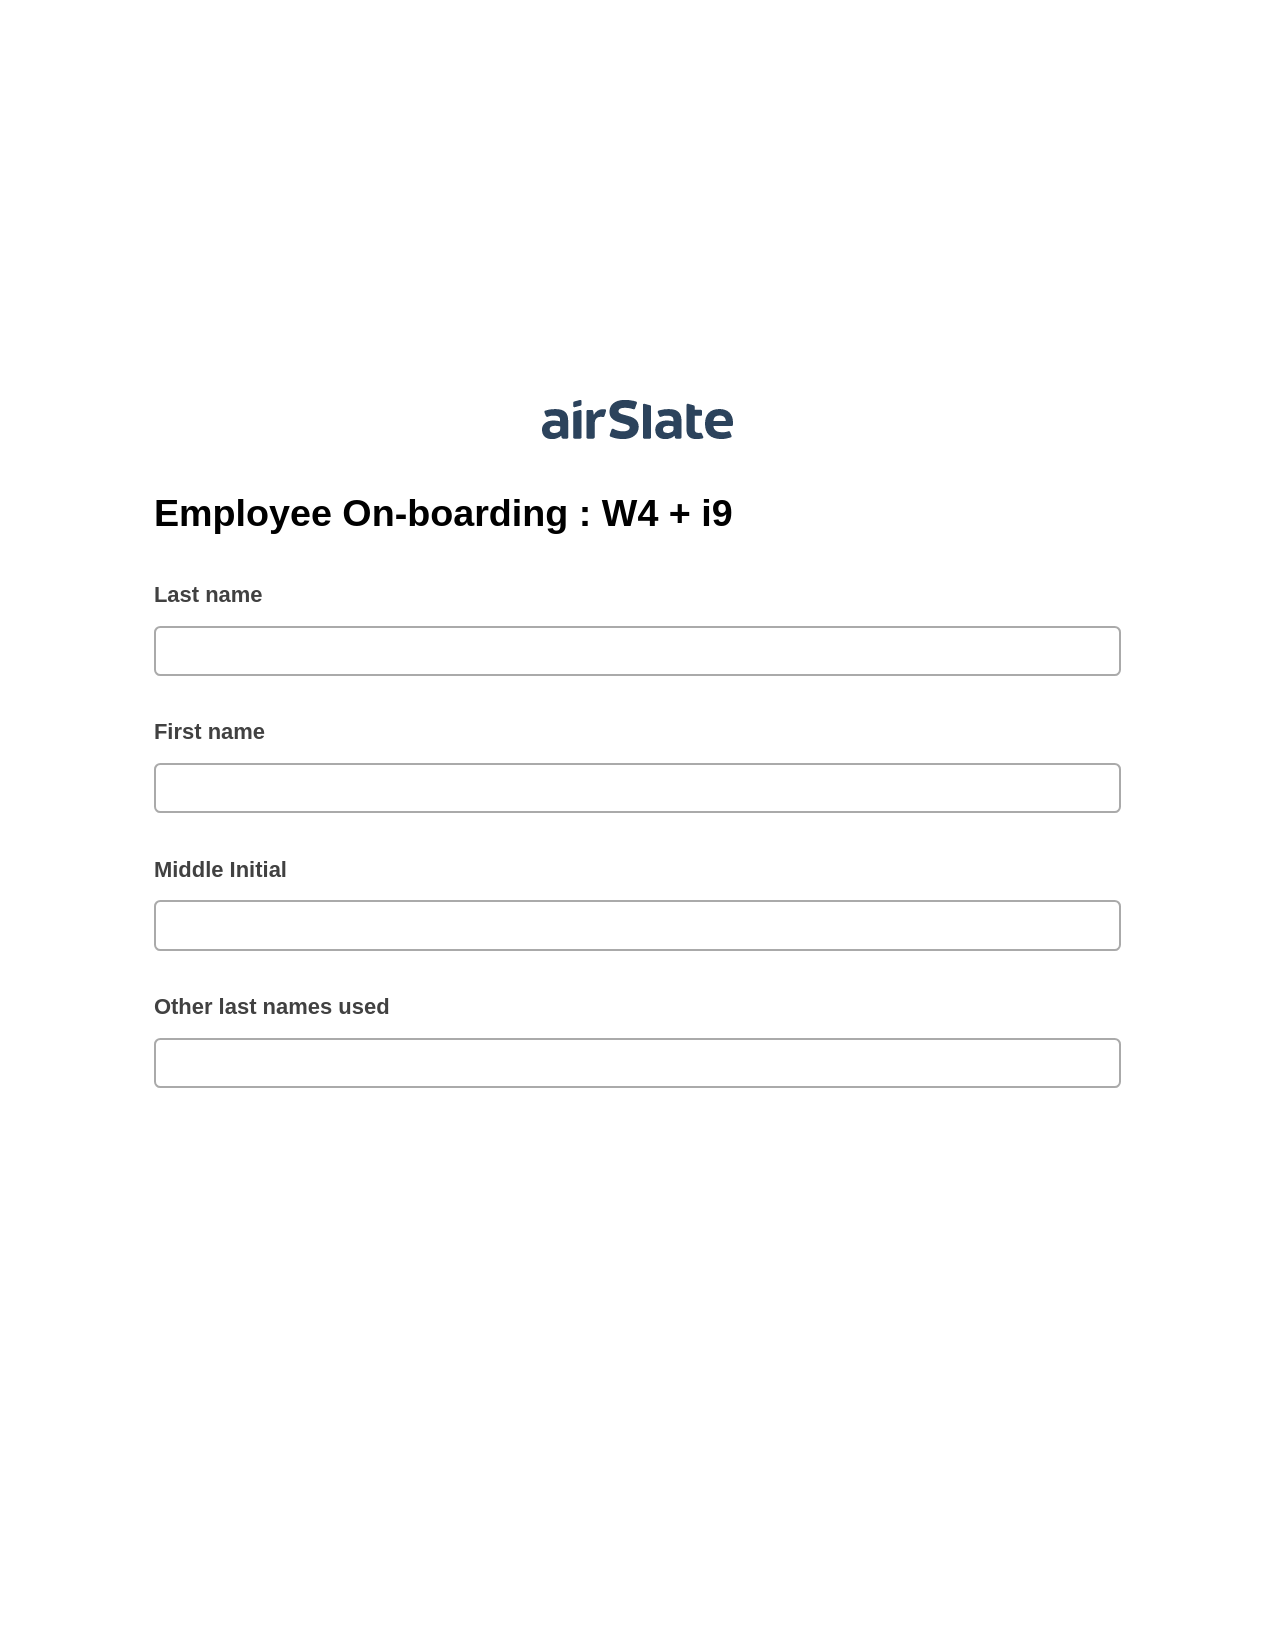 Employee On-boarding : W4 + i9 Pre-fill from MySQL Bot, Create Slate Bot, Export to Excel 365 Bot